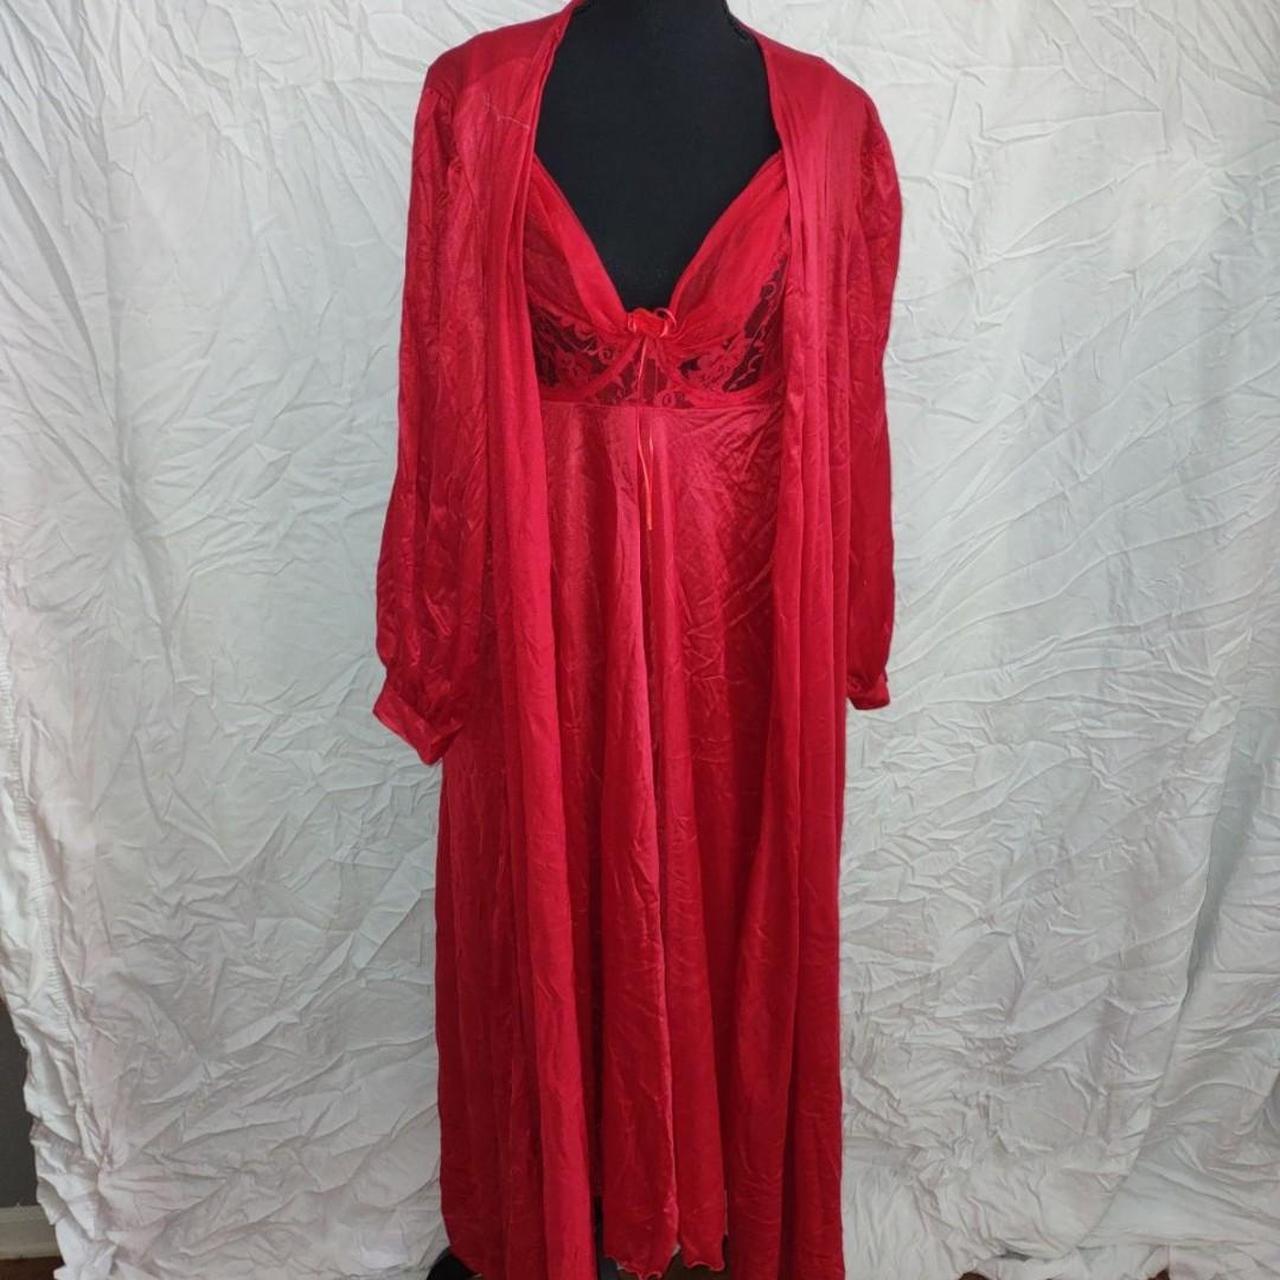 Product Image 1 - Red Vintage Vampire Gown

Beautiful vintage